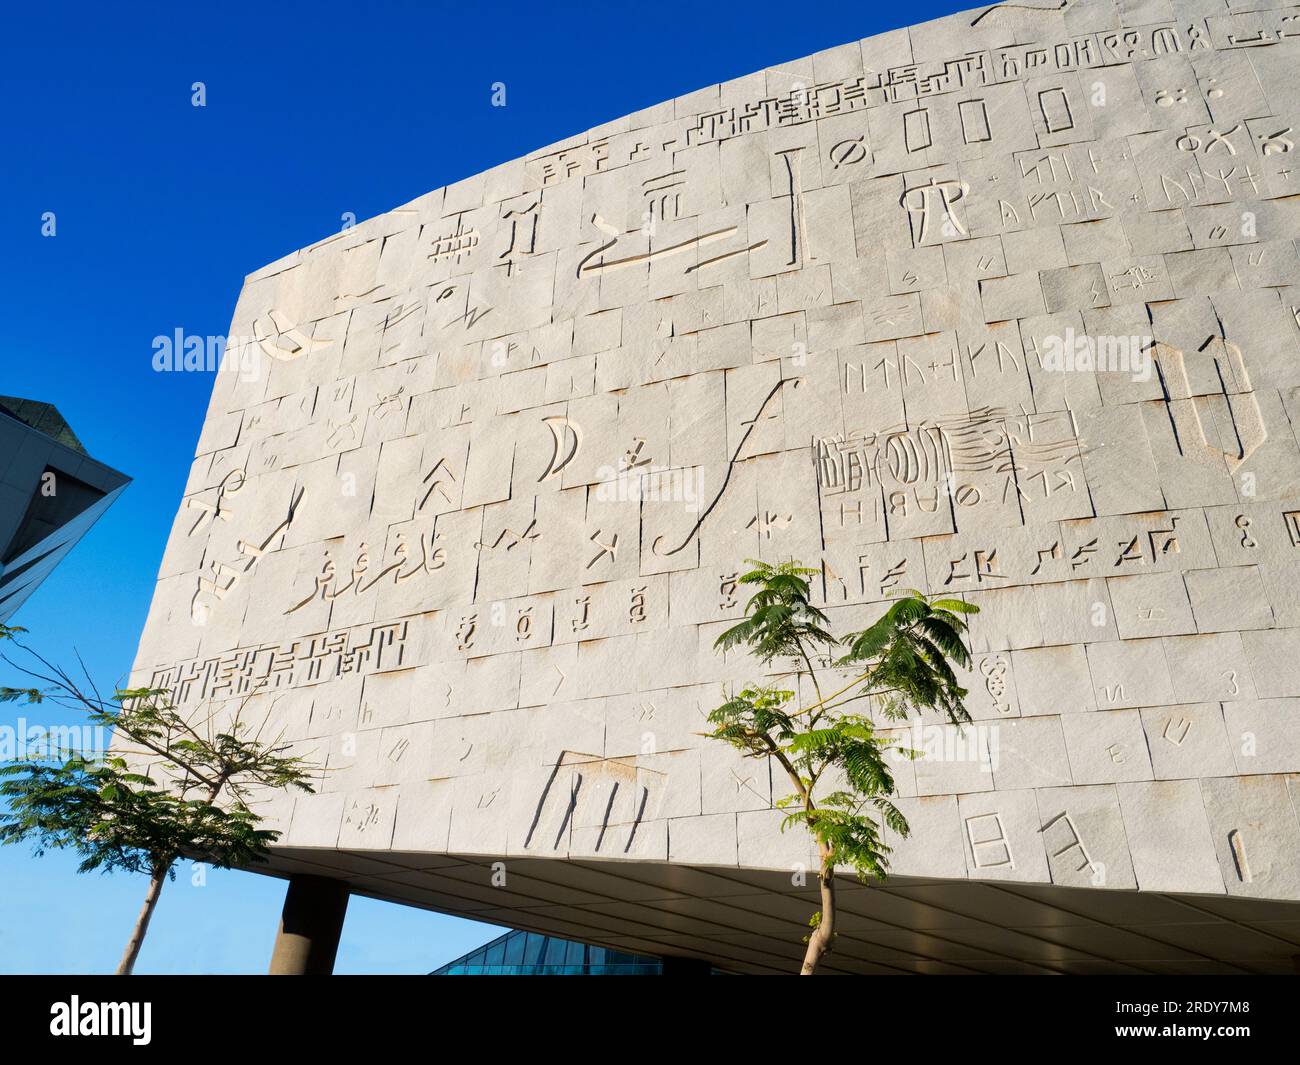 Located by the Mediterranean in Alexandria, Egypt, the spectacular Bibliotheca Alexandrina Library is a homage to - and re-imagining of - the Ancient Stock Photo